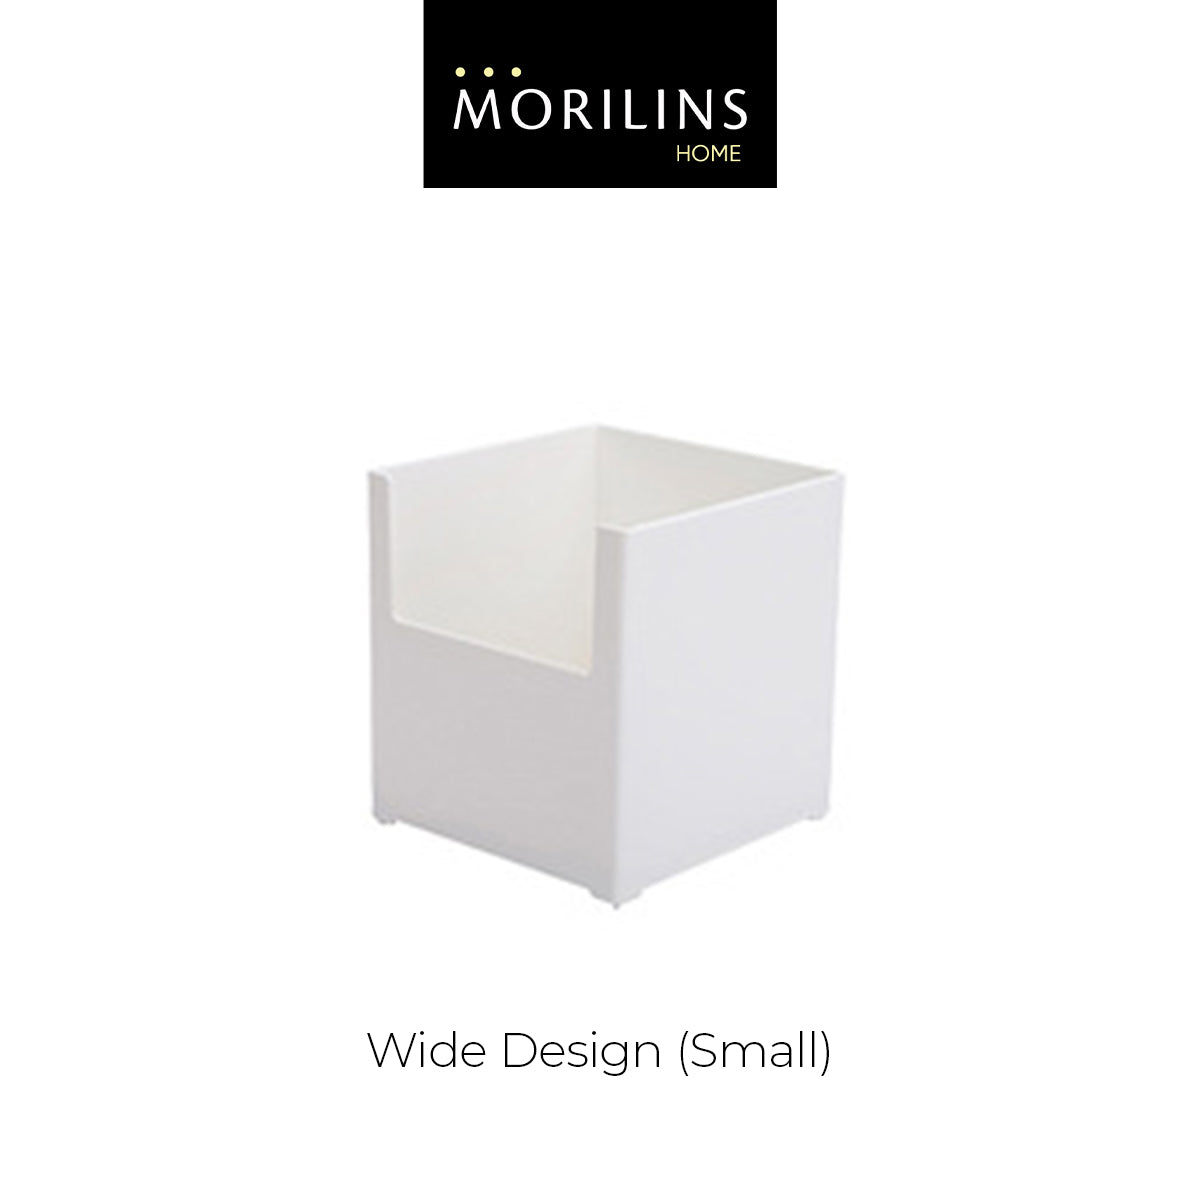 [Morilins Home] White Japanese-Style Modular Stackable Storage Box with Label Holder - Clean & Tidy Look with Easy Access for Sundries, Snacks, Kitchenware & Cosmetics - Bloom Concept